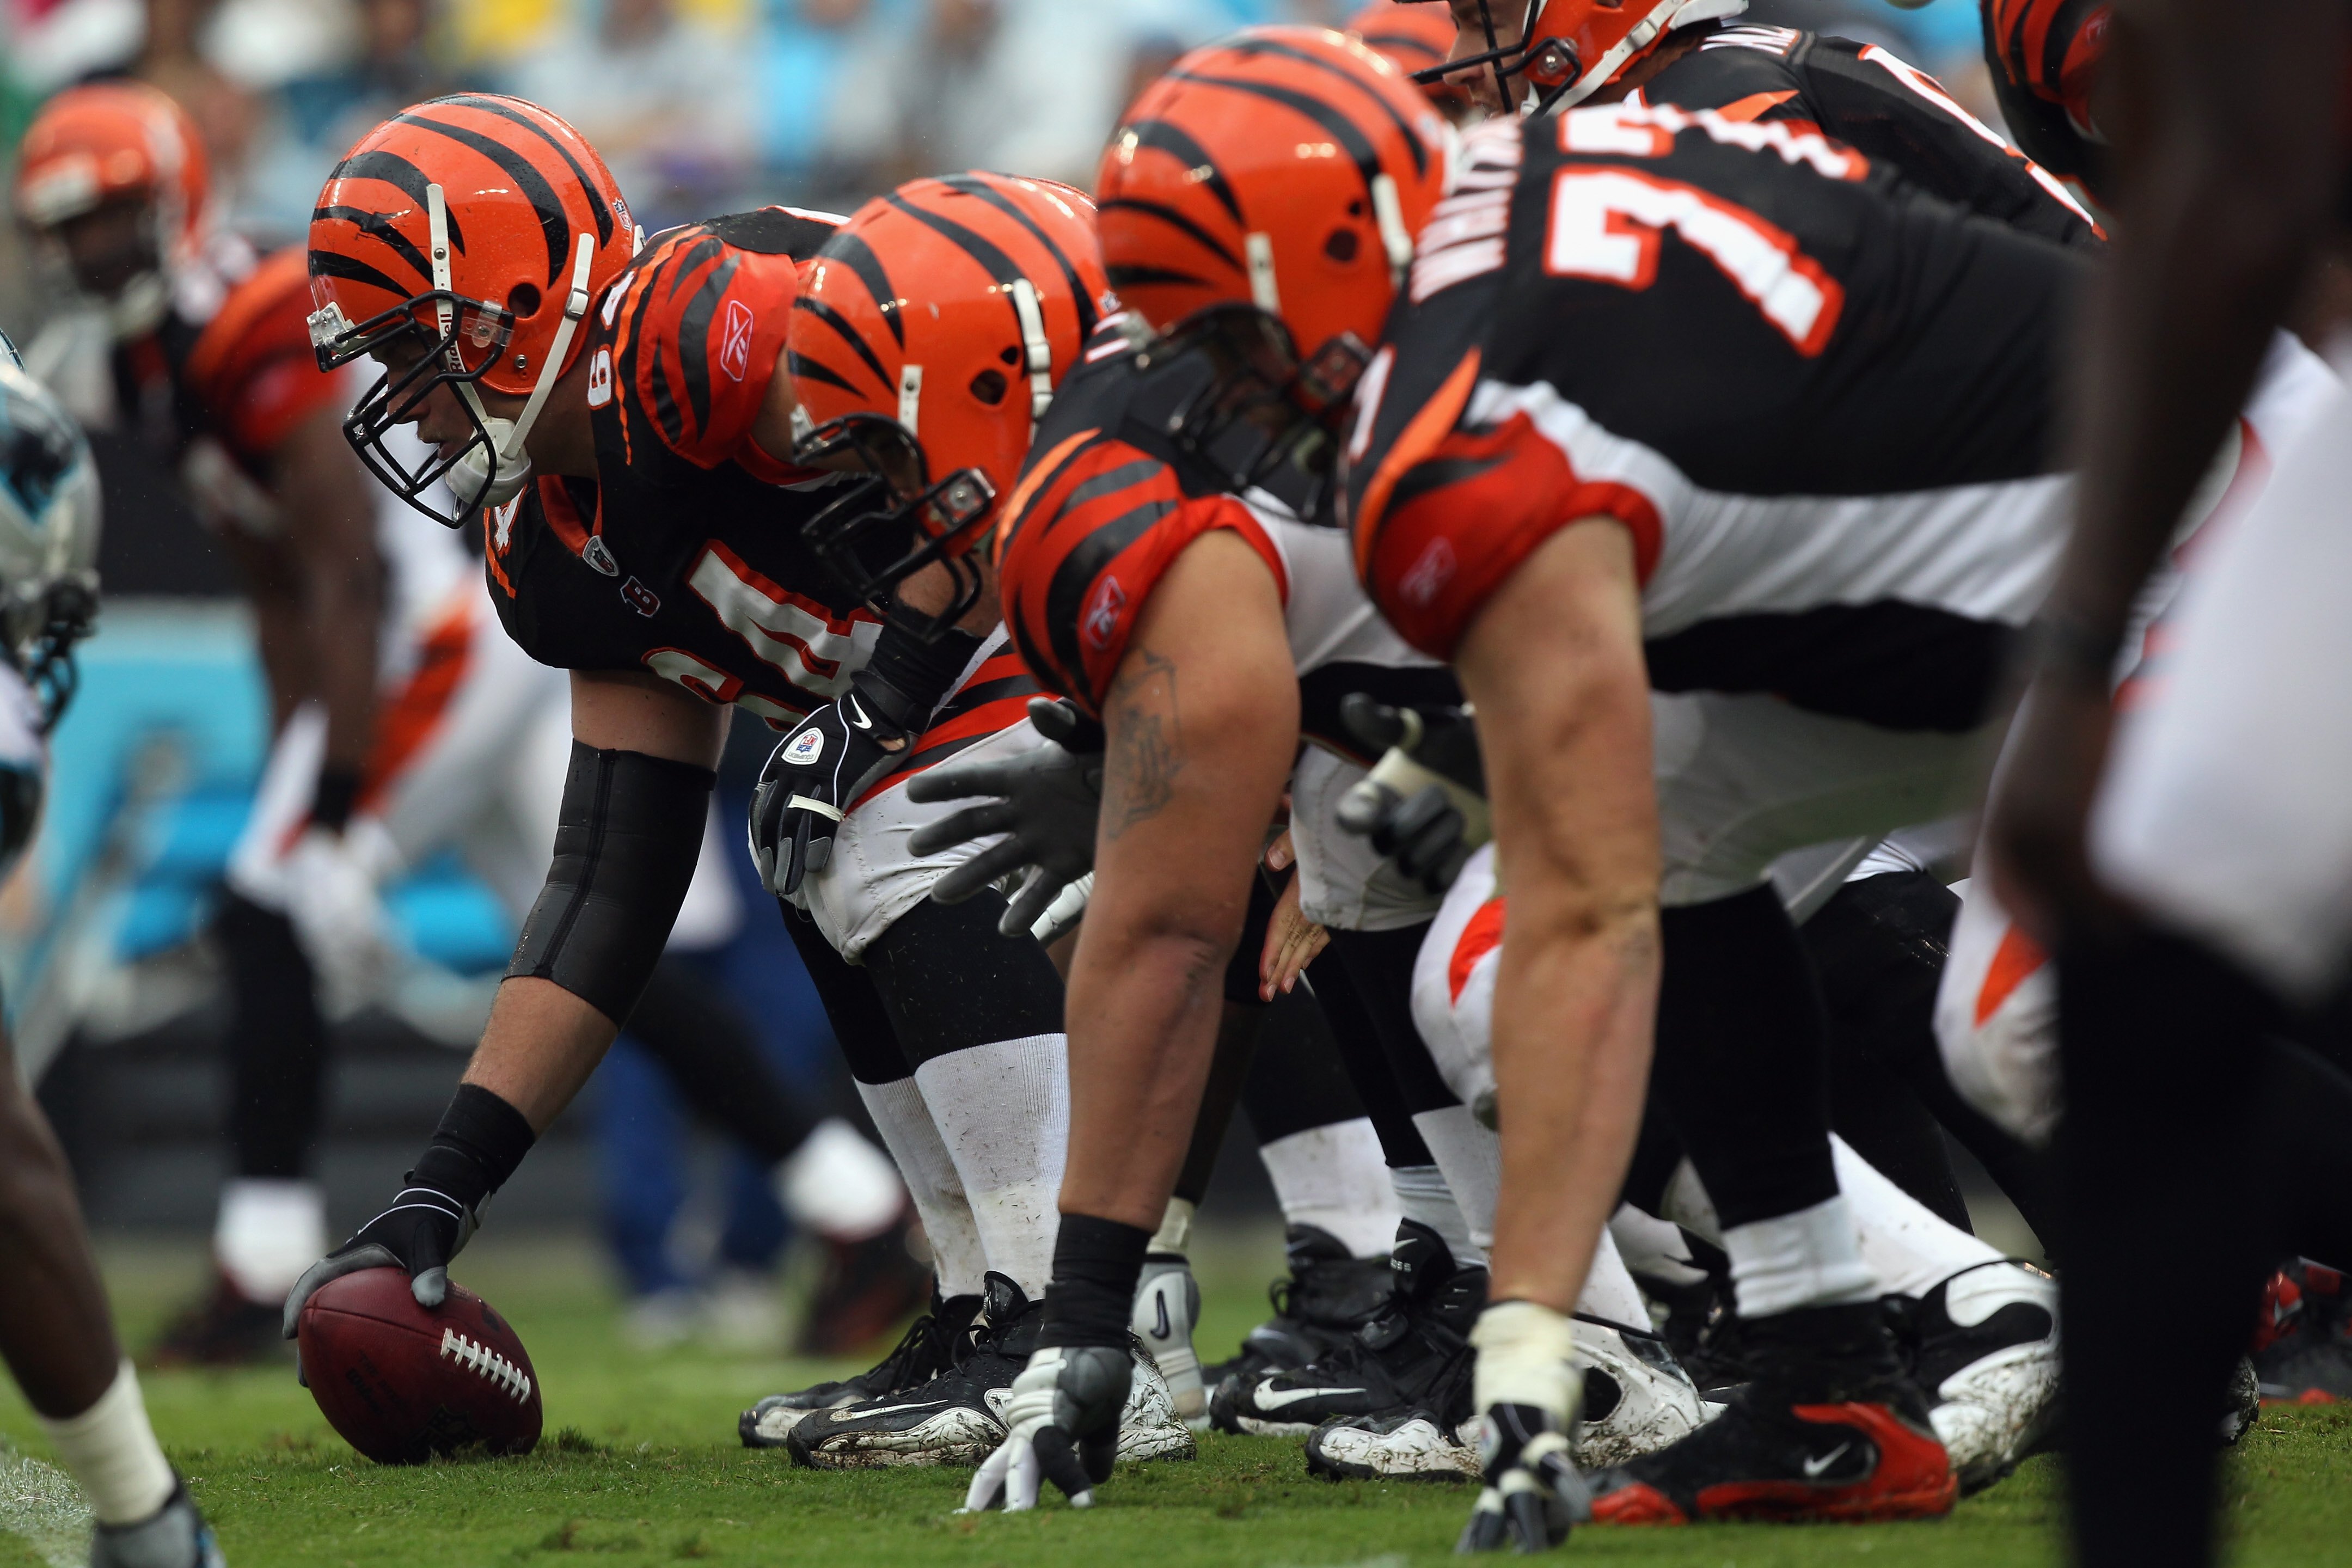 The Bengals are looking to return to the playoffs in 2010.